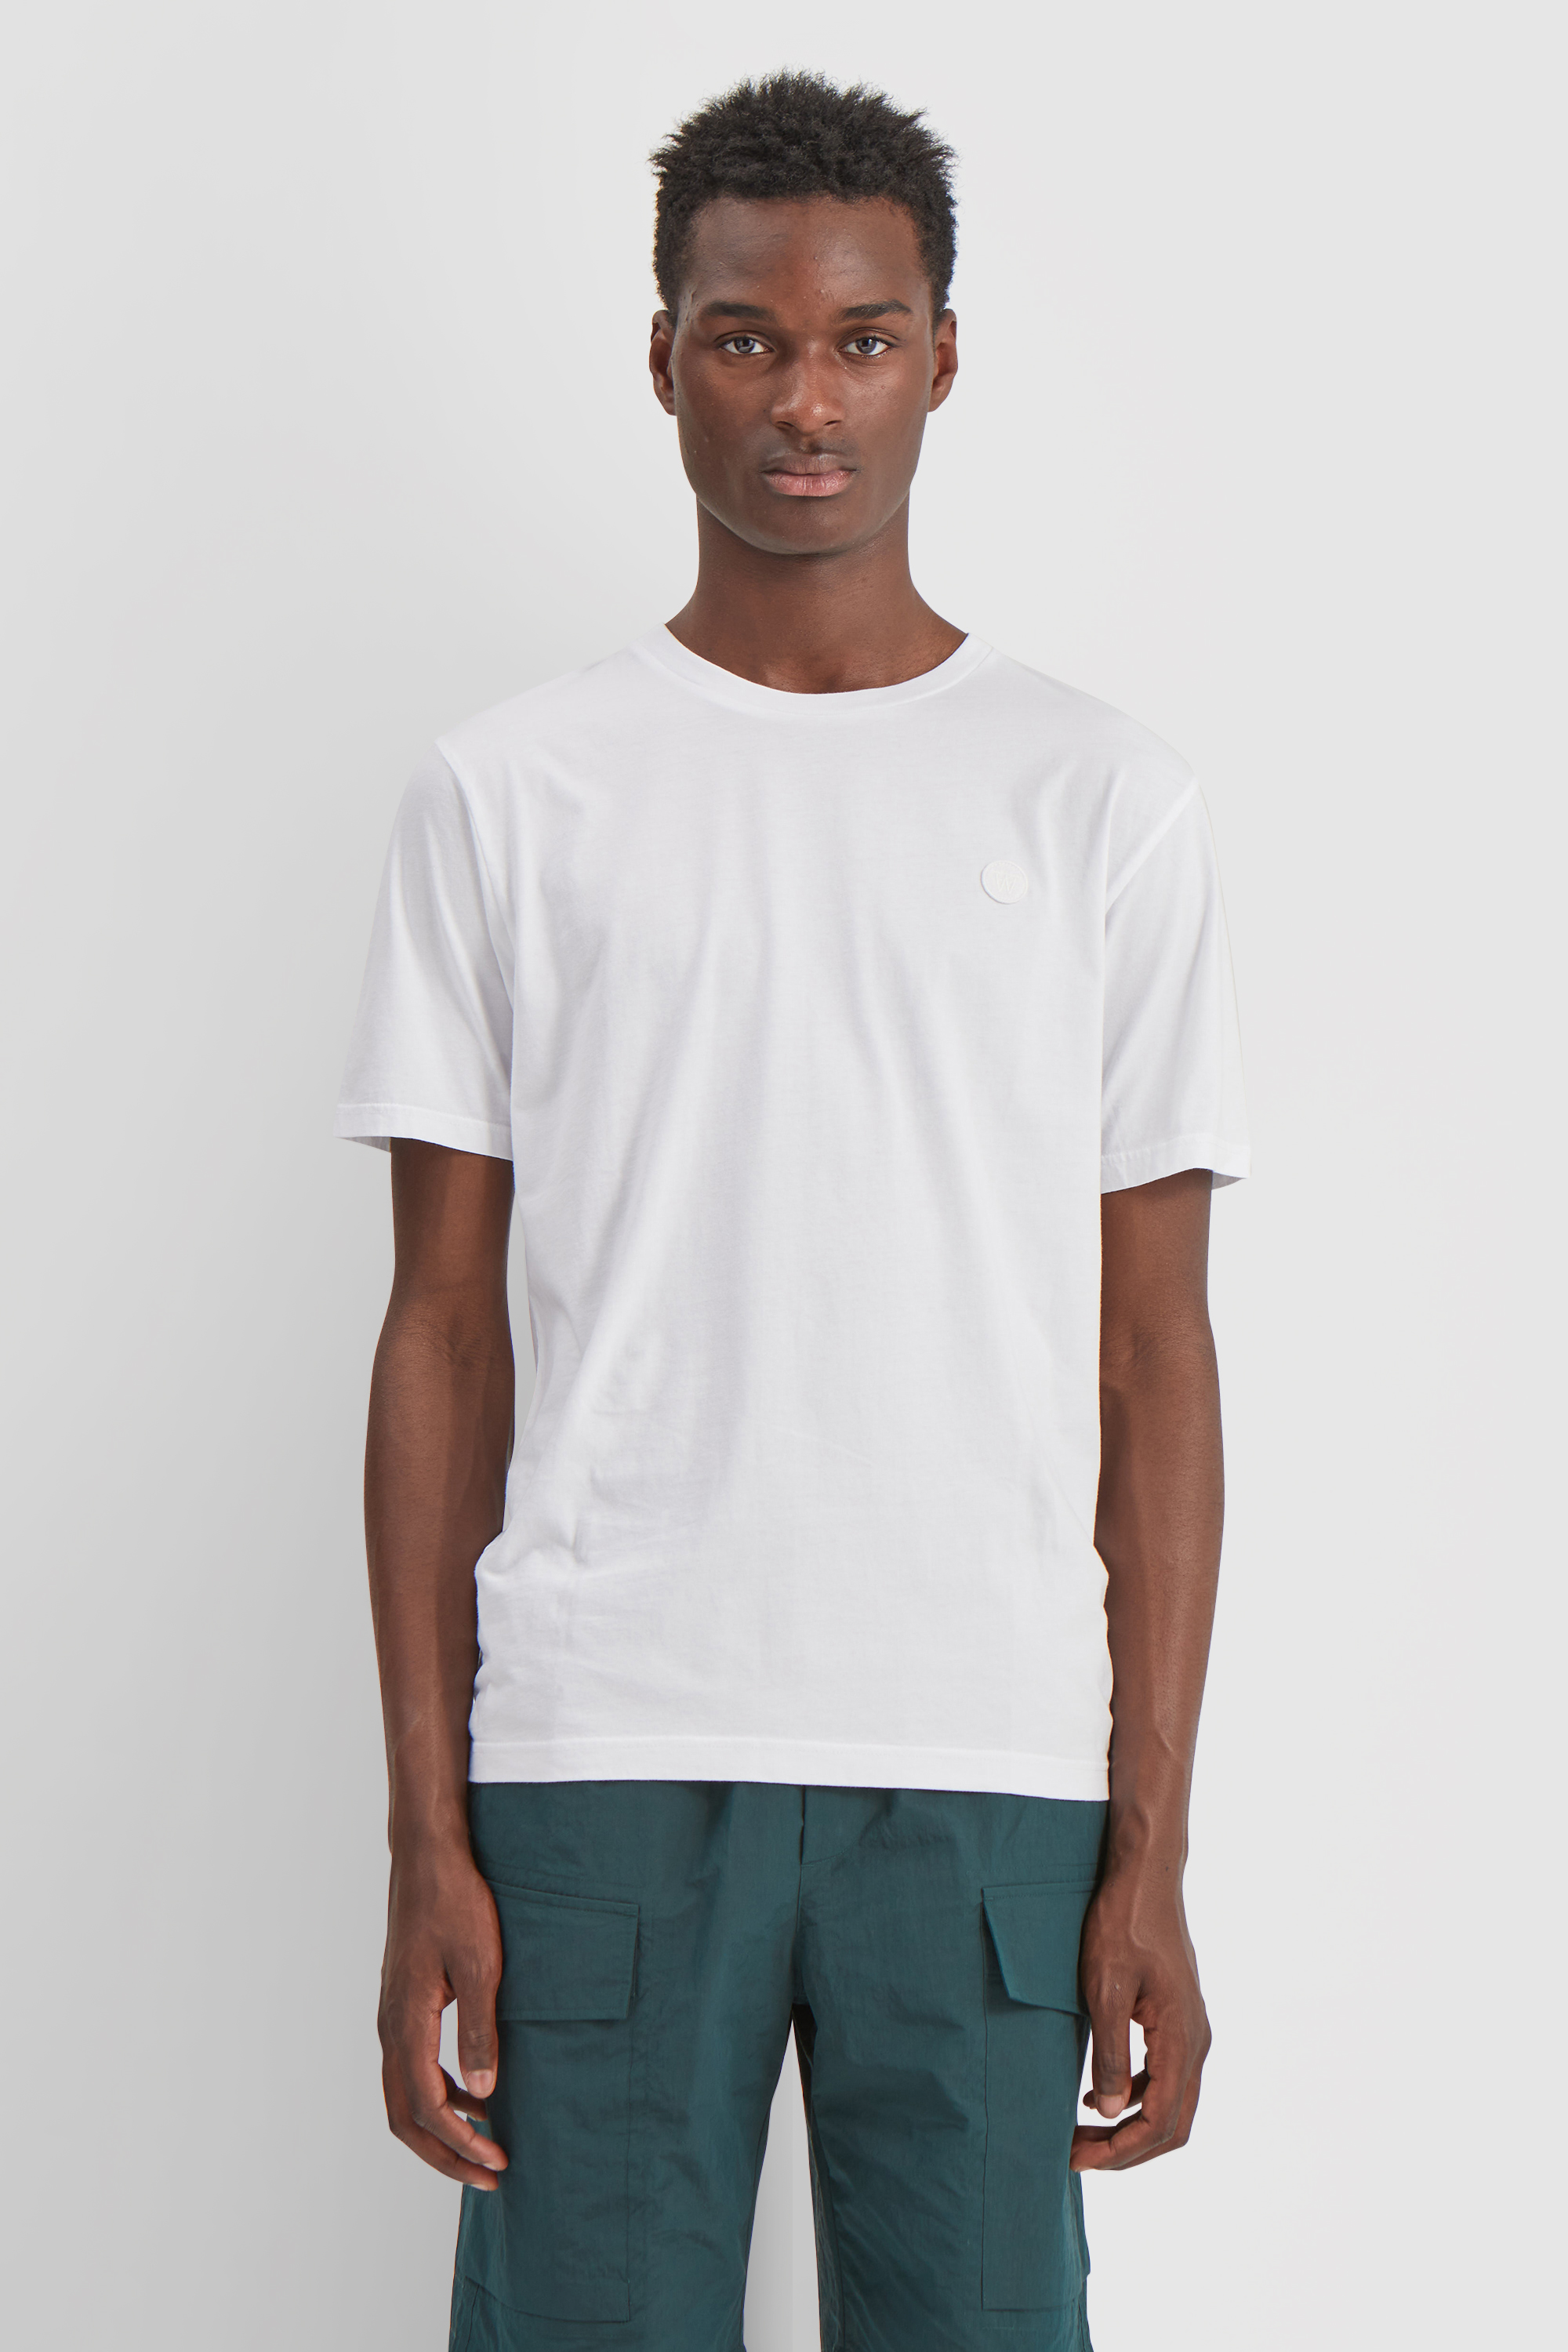 Double A by Wood Wood Ace T-shirt White/white | WoodWood.com